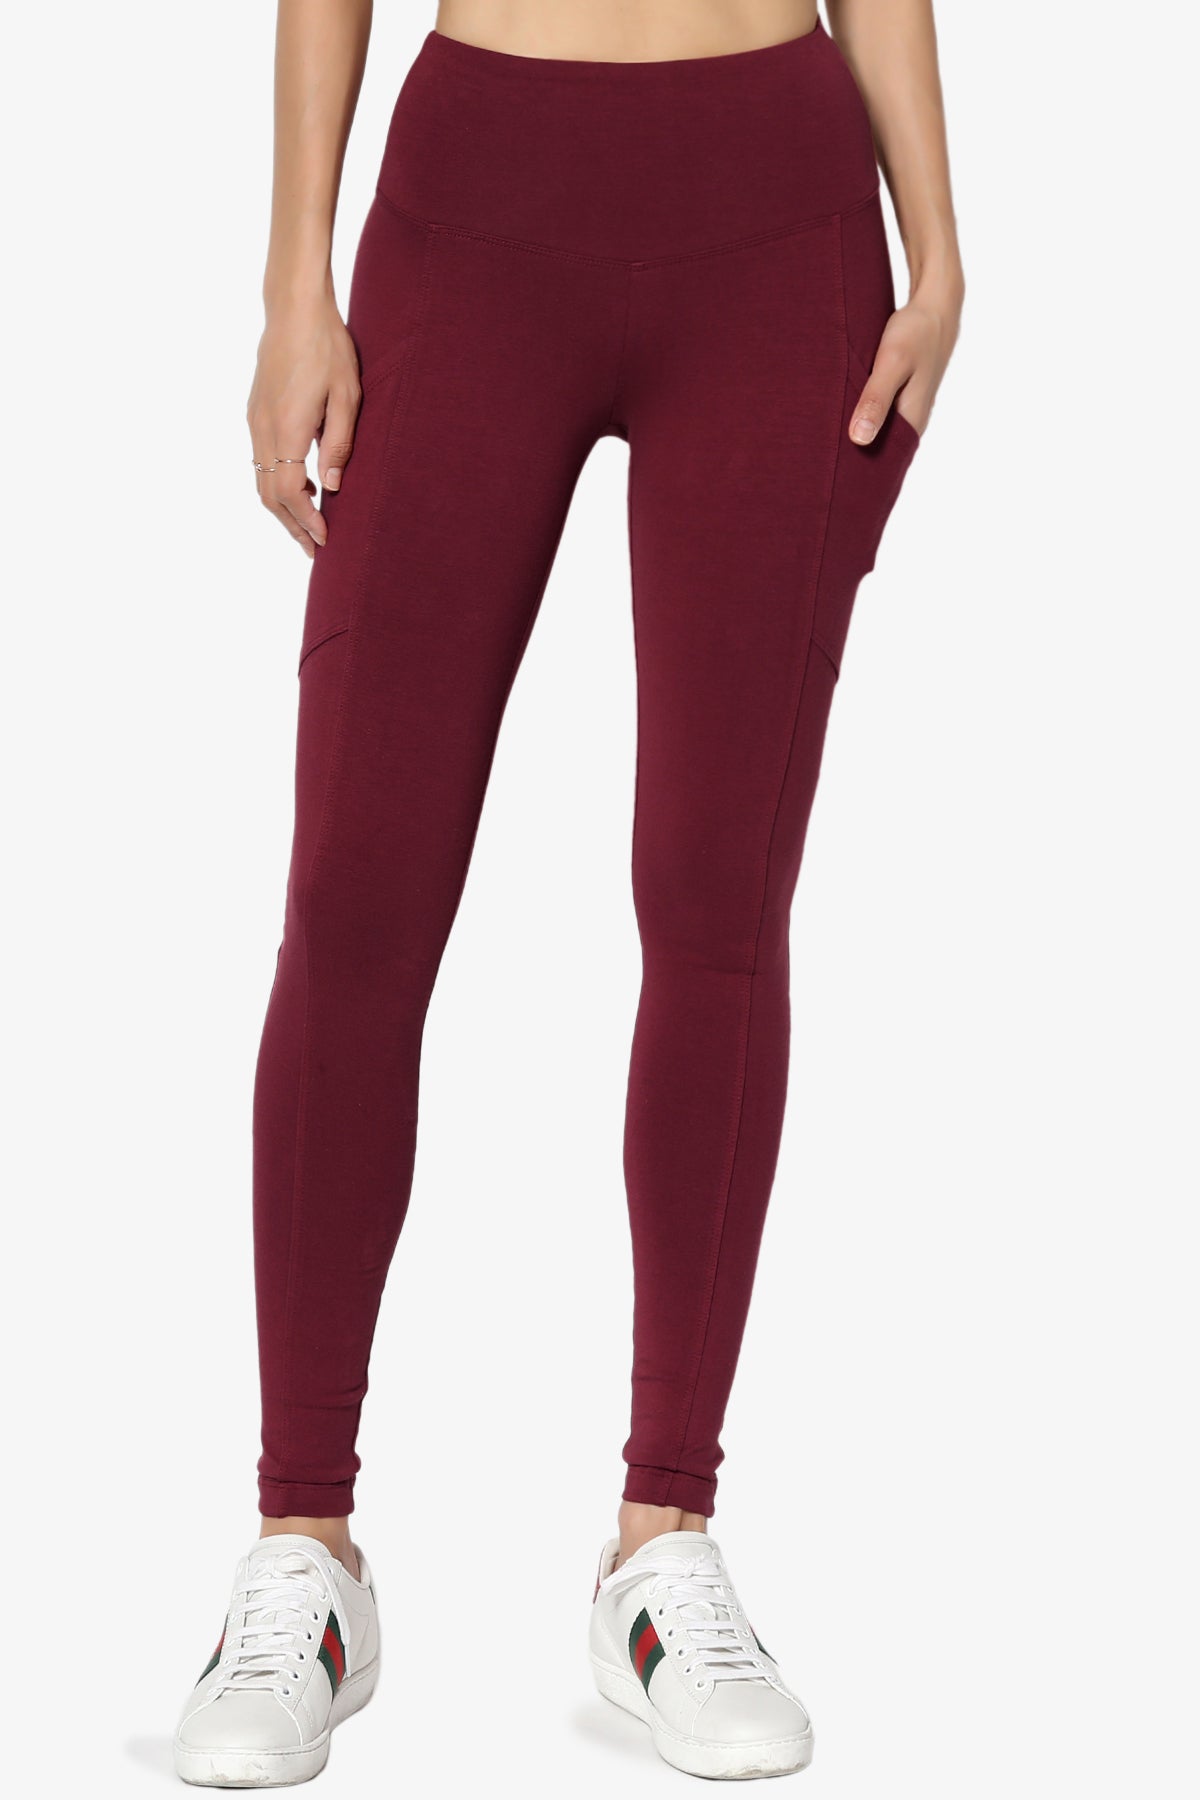 Load image into Gallery viewer, Ansley Luxe Cotton Leggings with Pockets DARK BURGUNDY_3
